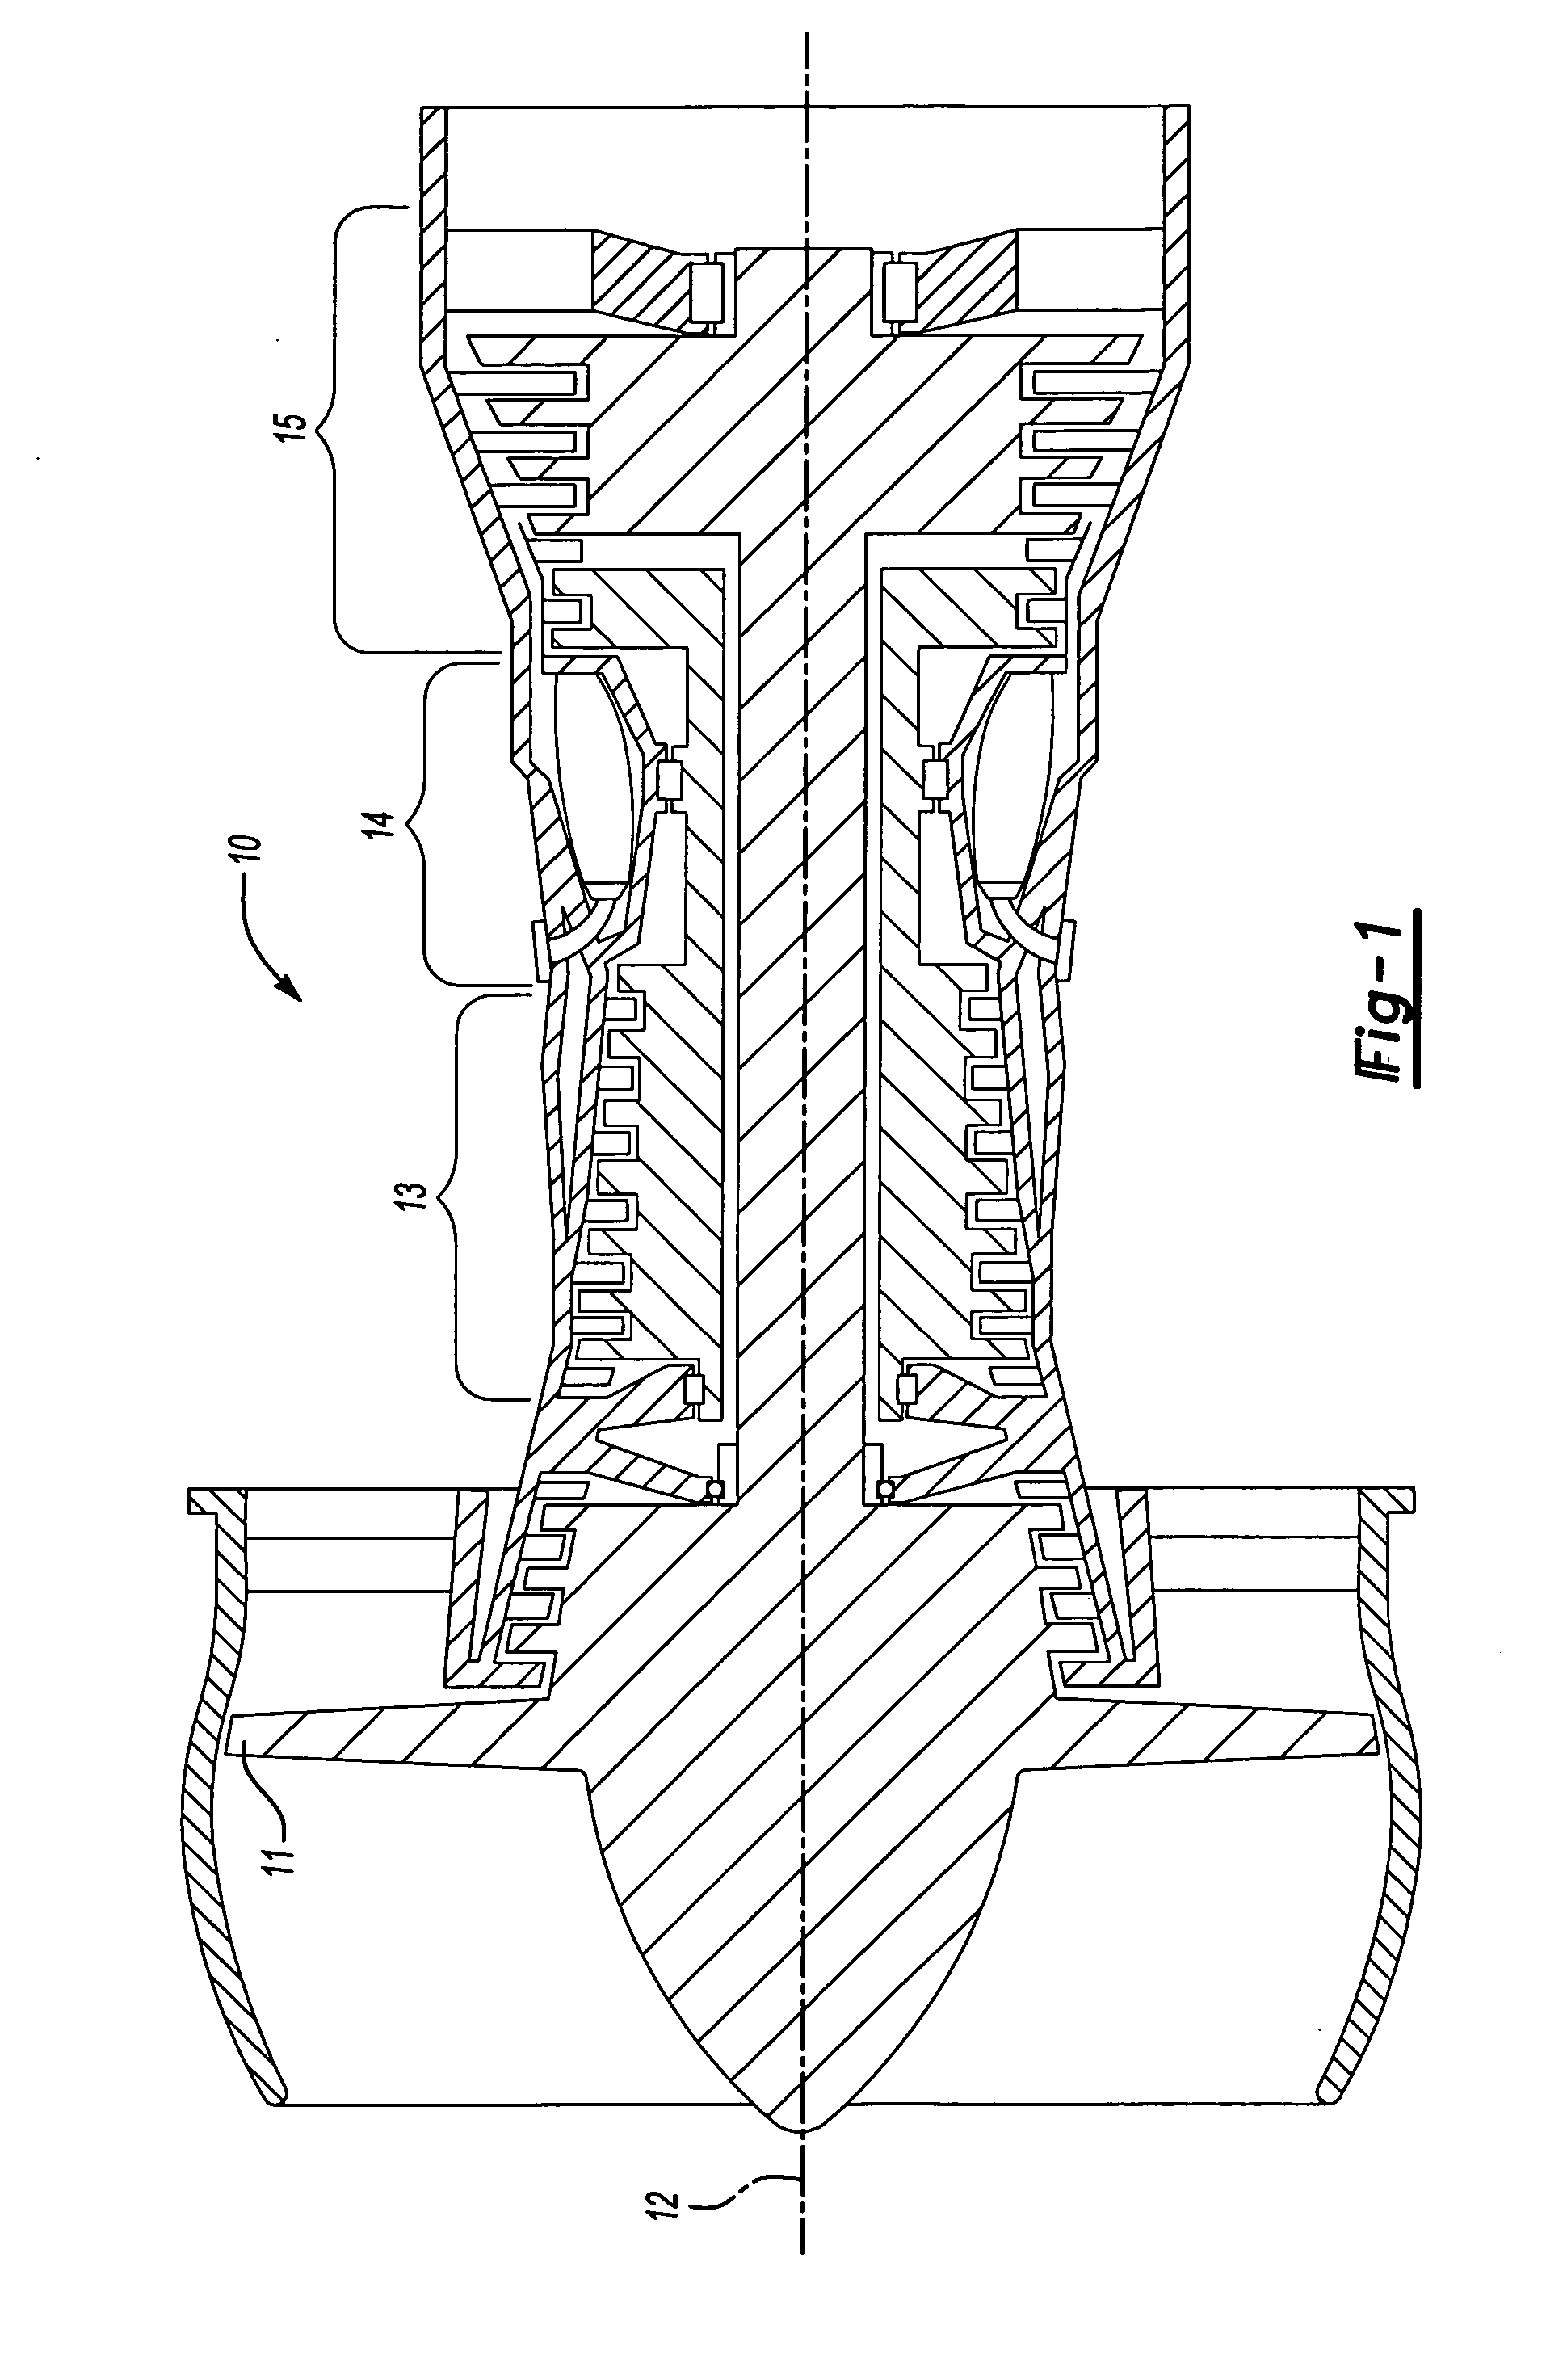 Self-actuating bleed valve for gas turbine engine